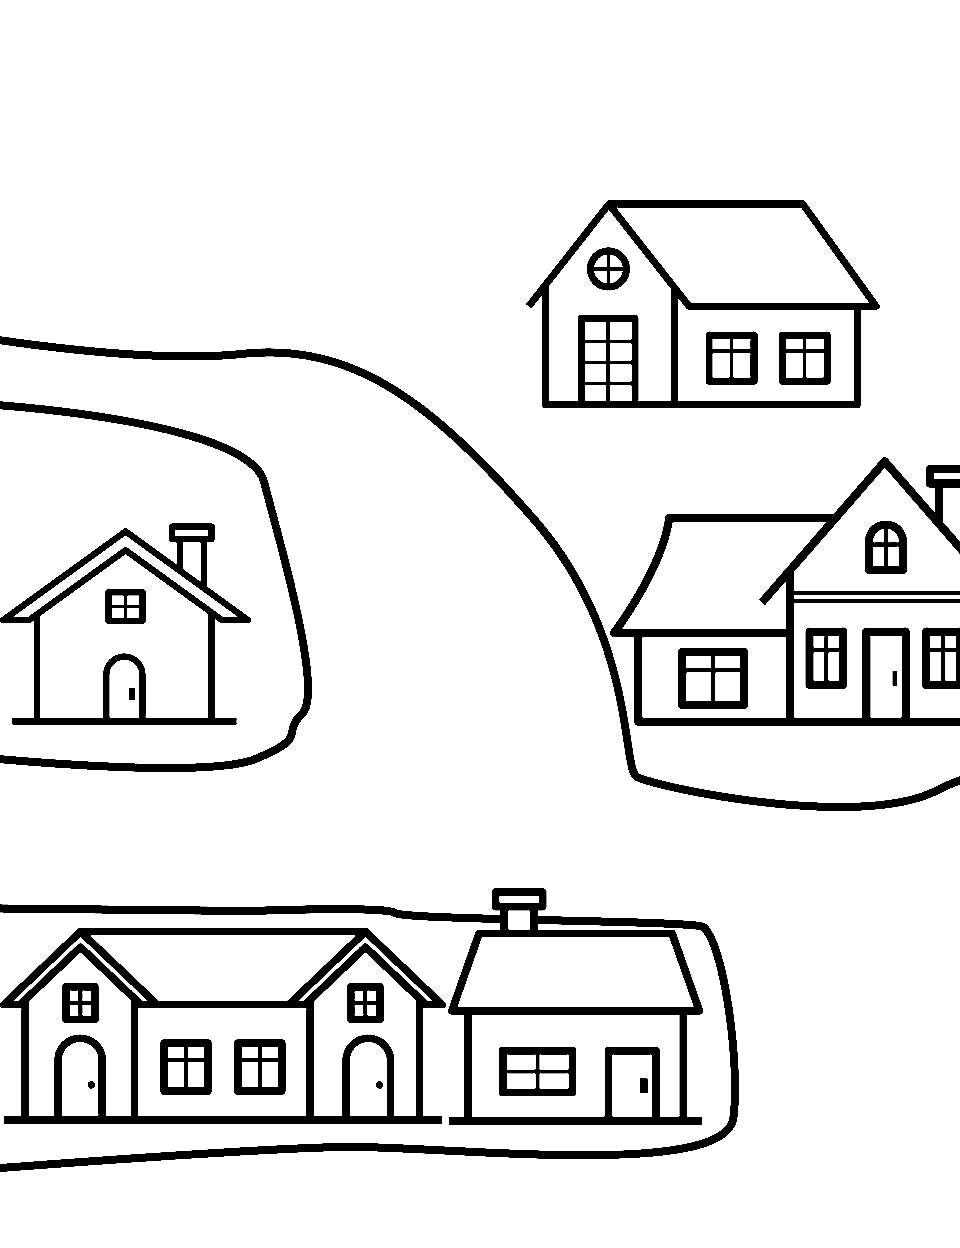 Village Vista Coloring Page - A village with small houses.